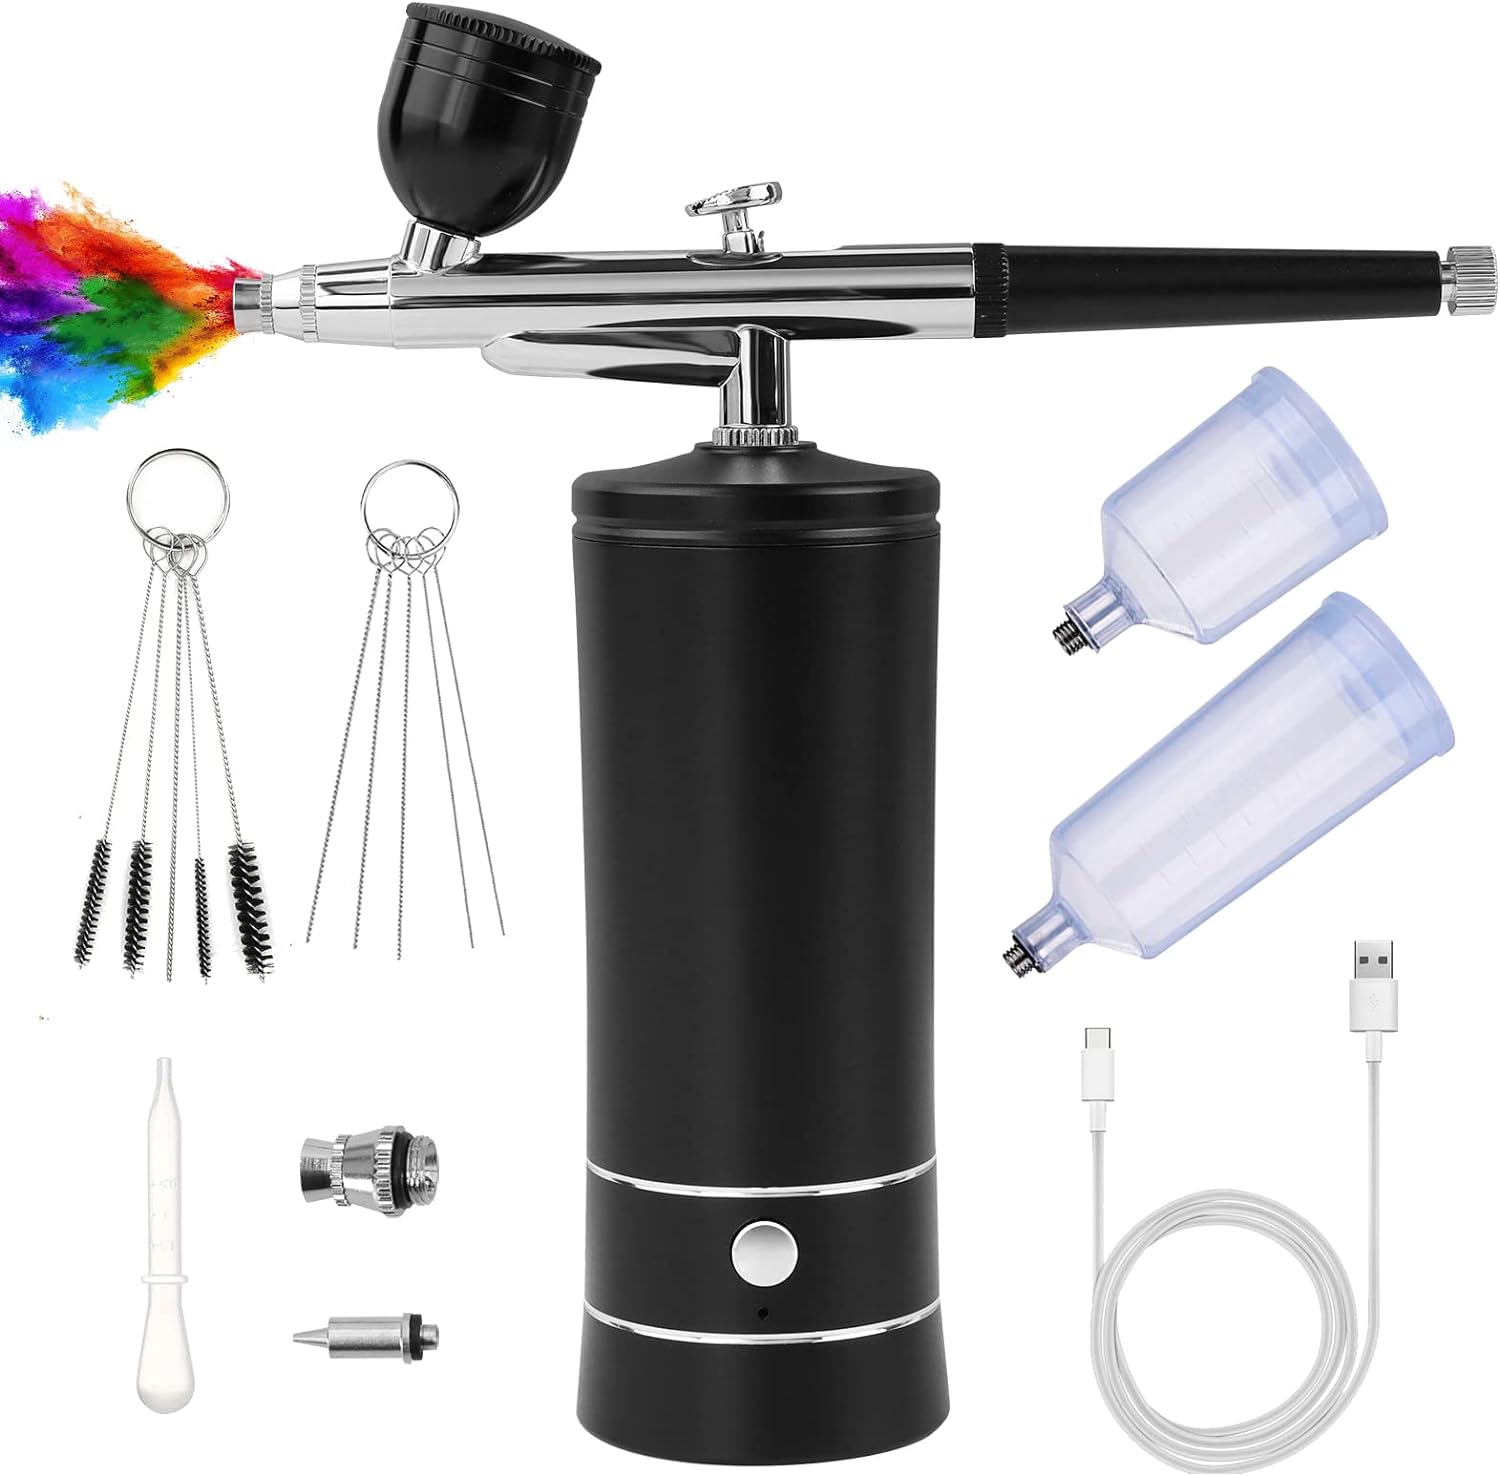 Autolock Upgraded Airbrush Kit with Air Compressor, Portable Cordless Auto  Airbrush Gun Kit, Rechargeable Handheld Airbrush Set for Makeup, Cake